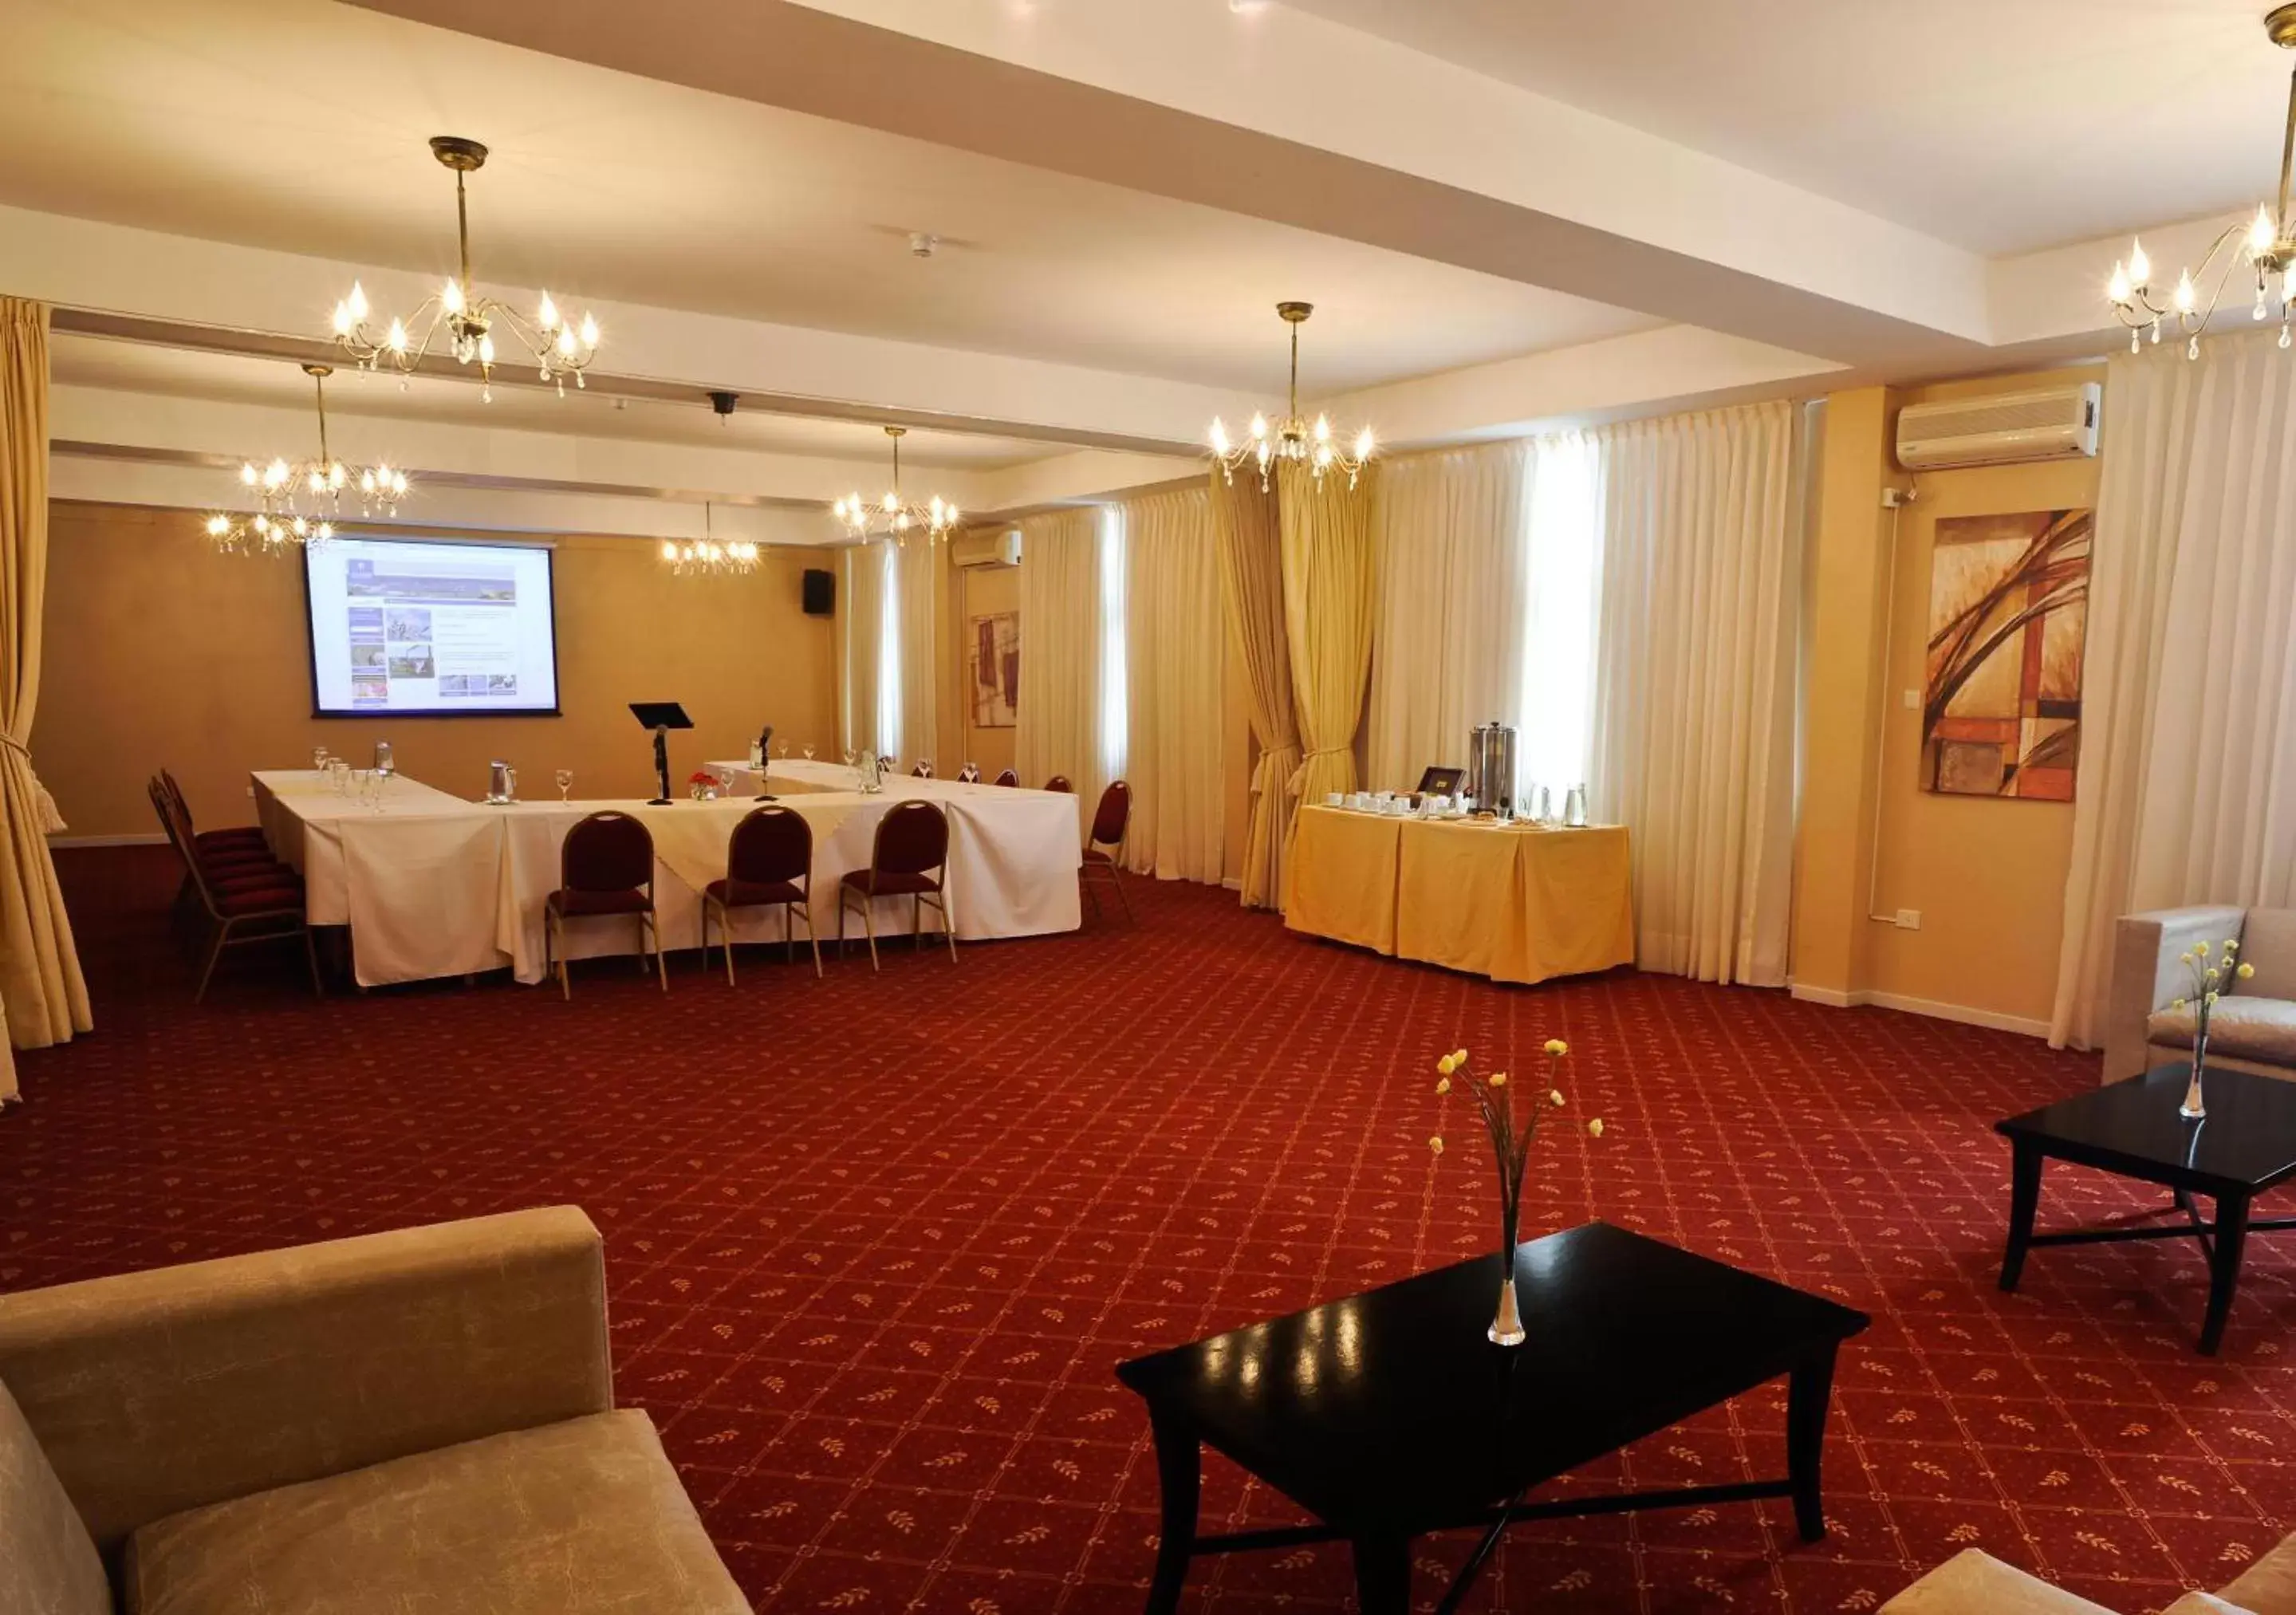 Meeting/conference room, Banquet Facilities in Yene hue